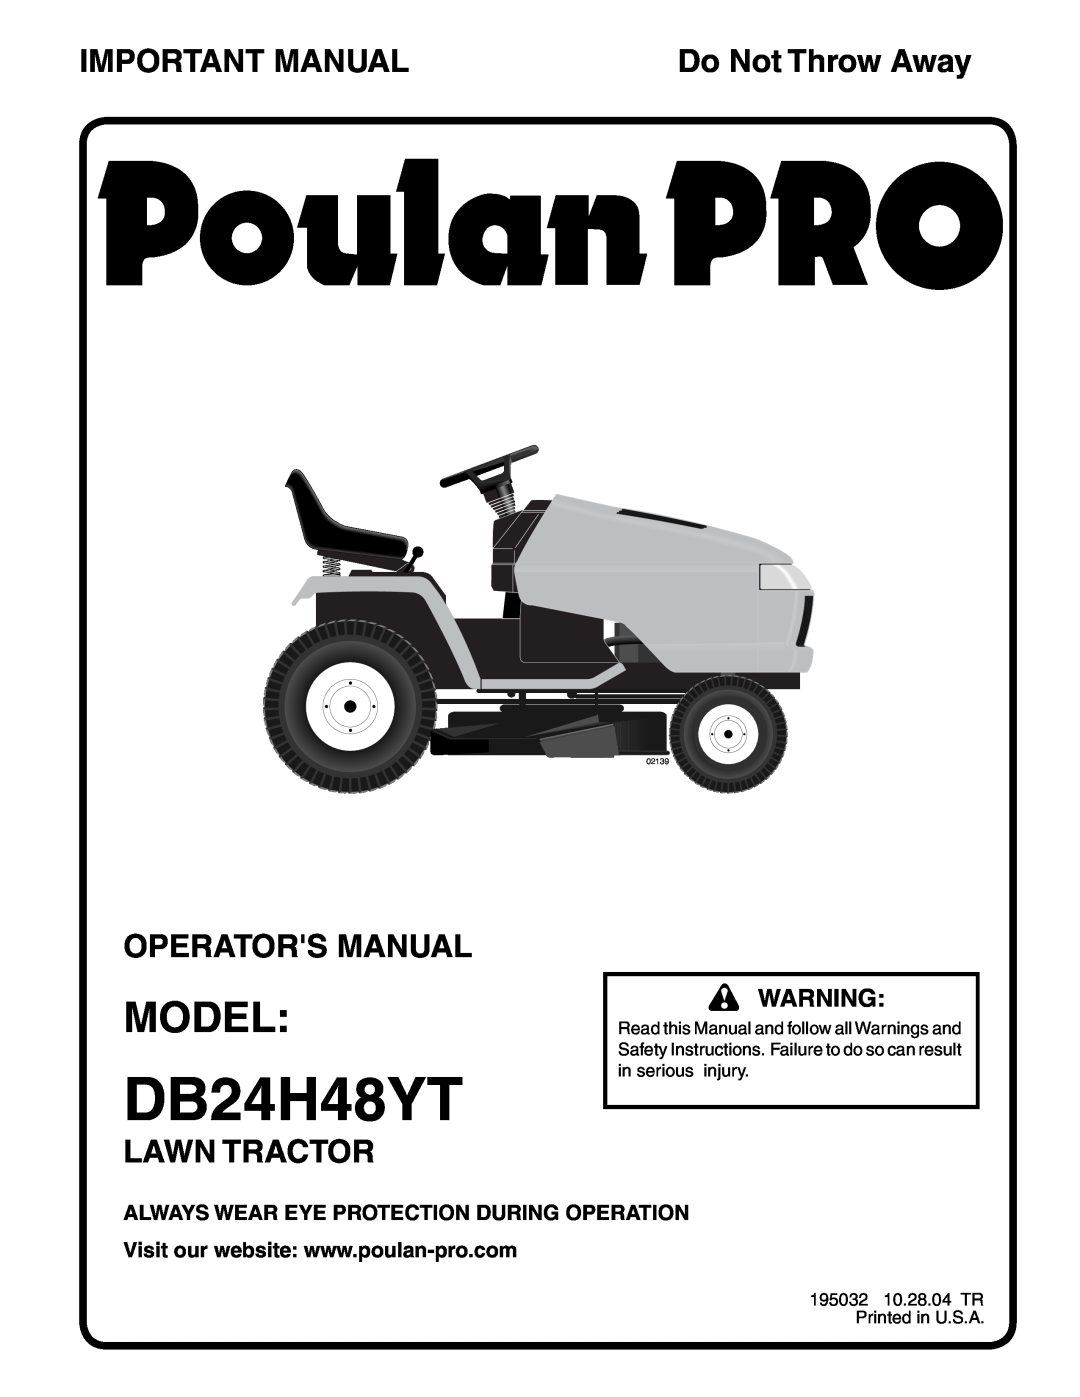 Poulan 195032 manual Model, Important Manual, Operators Manual, Lawn Tractor, Always Wear Eye Protection During Operation 